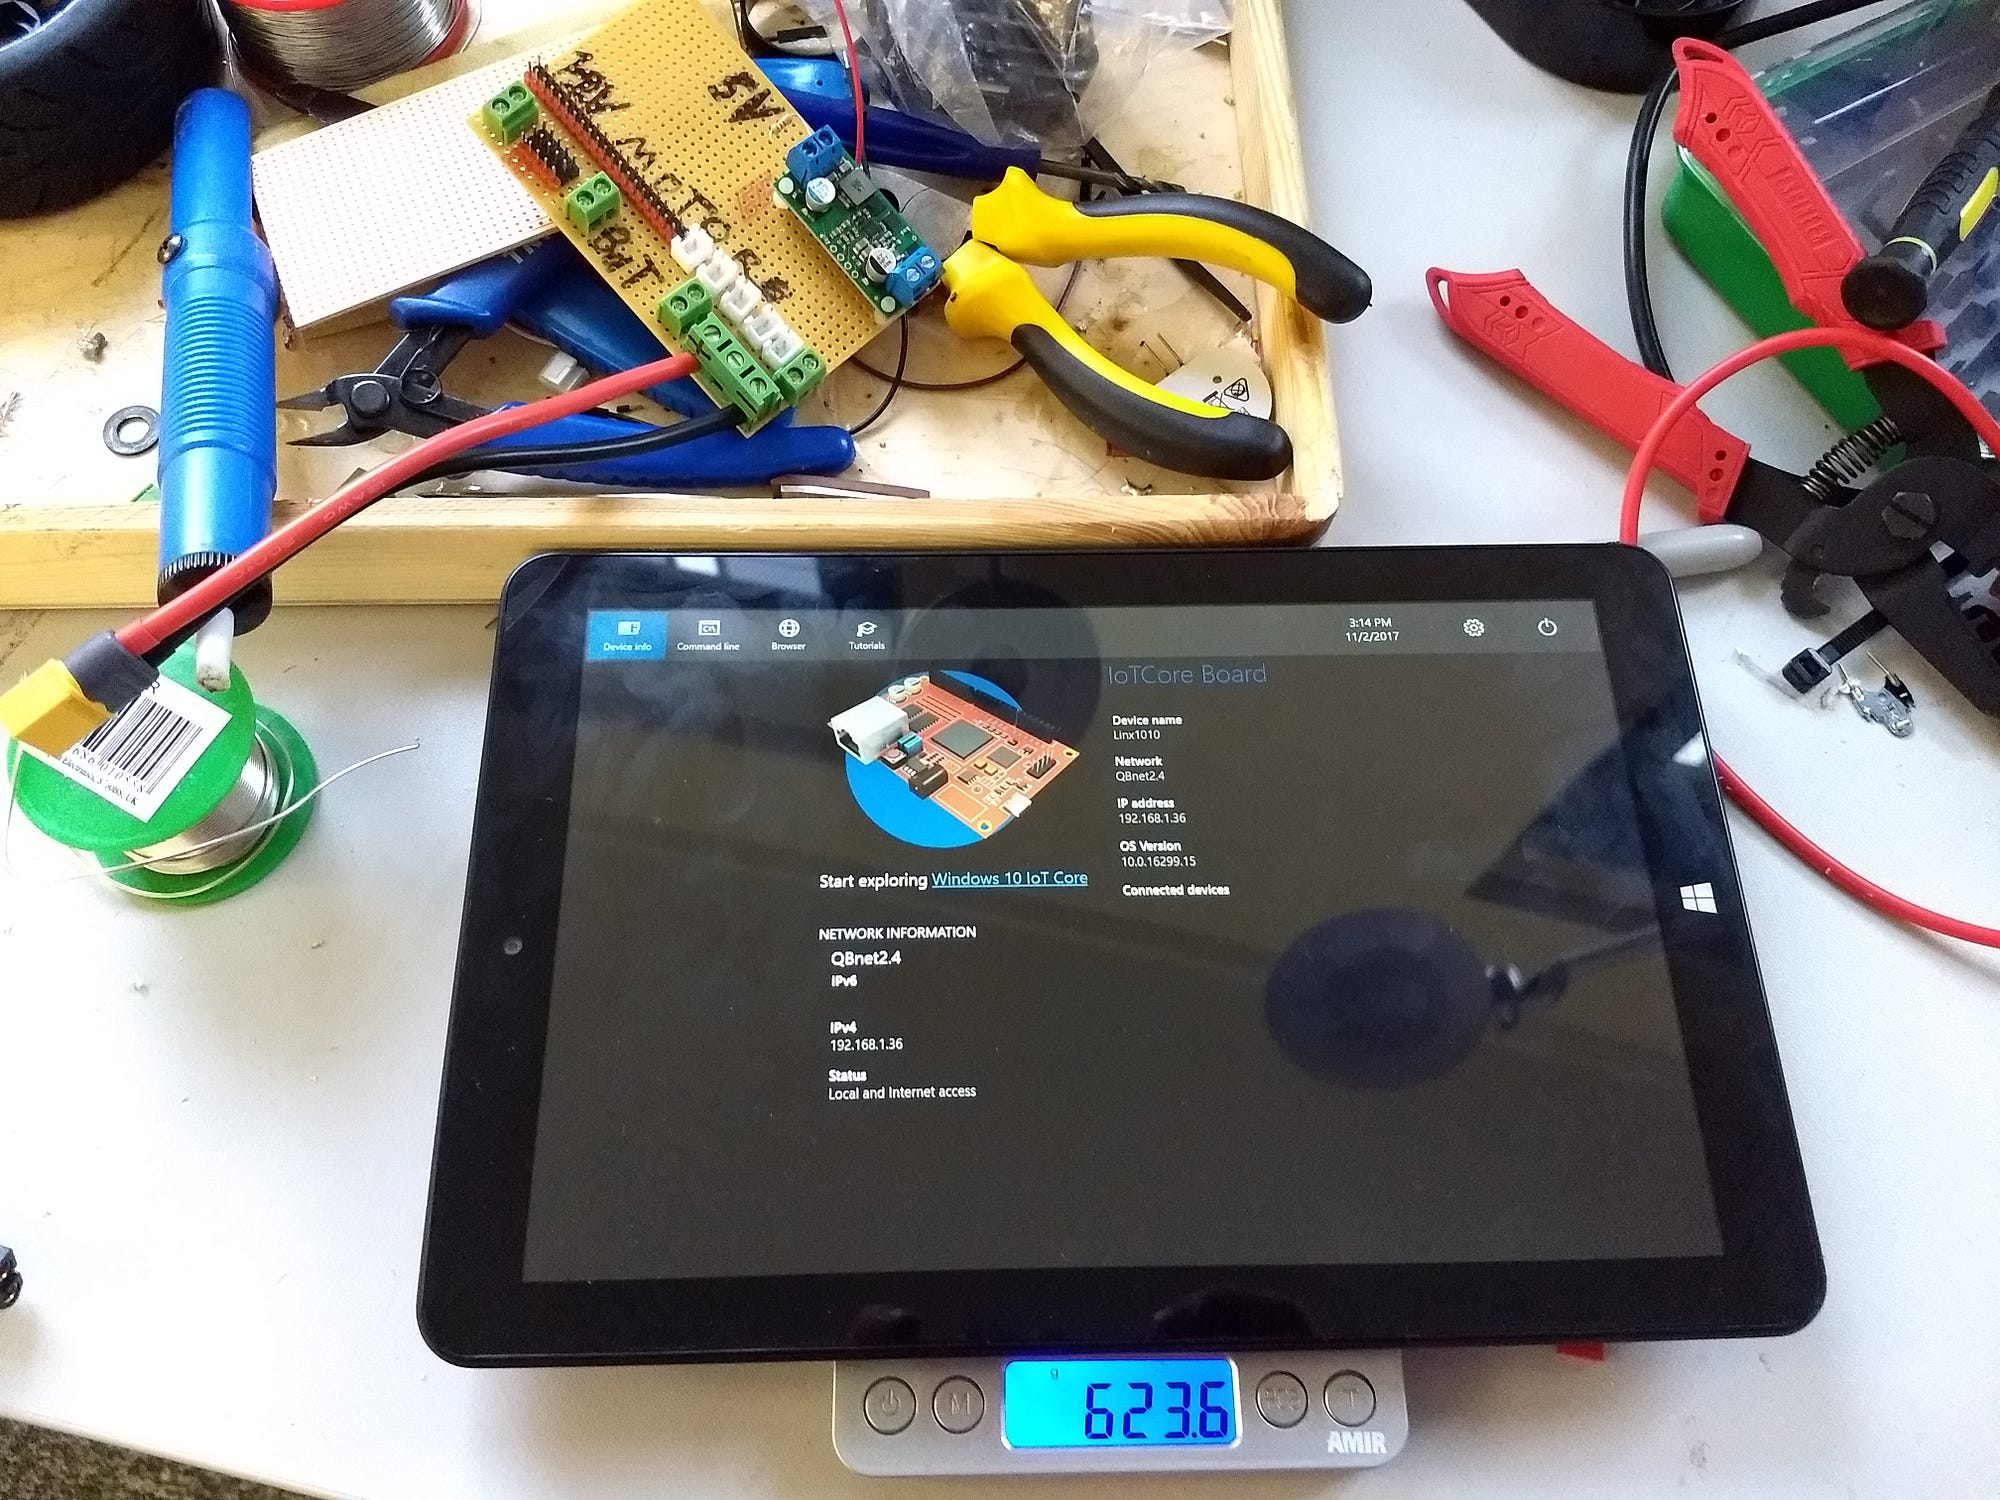 How to install Windows IoT on a Tablet, by Vladimir Akopyan